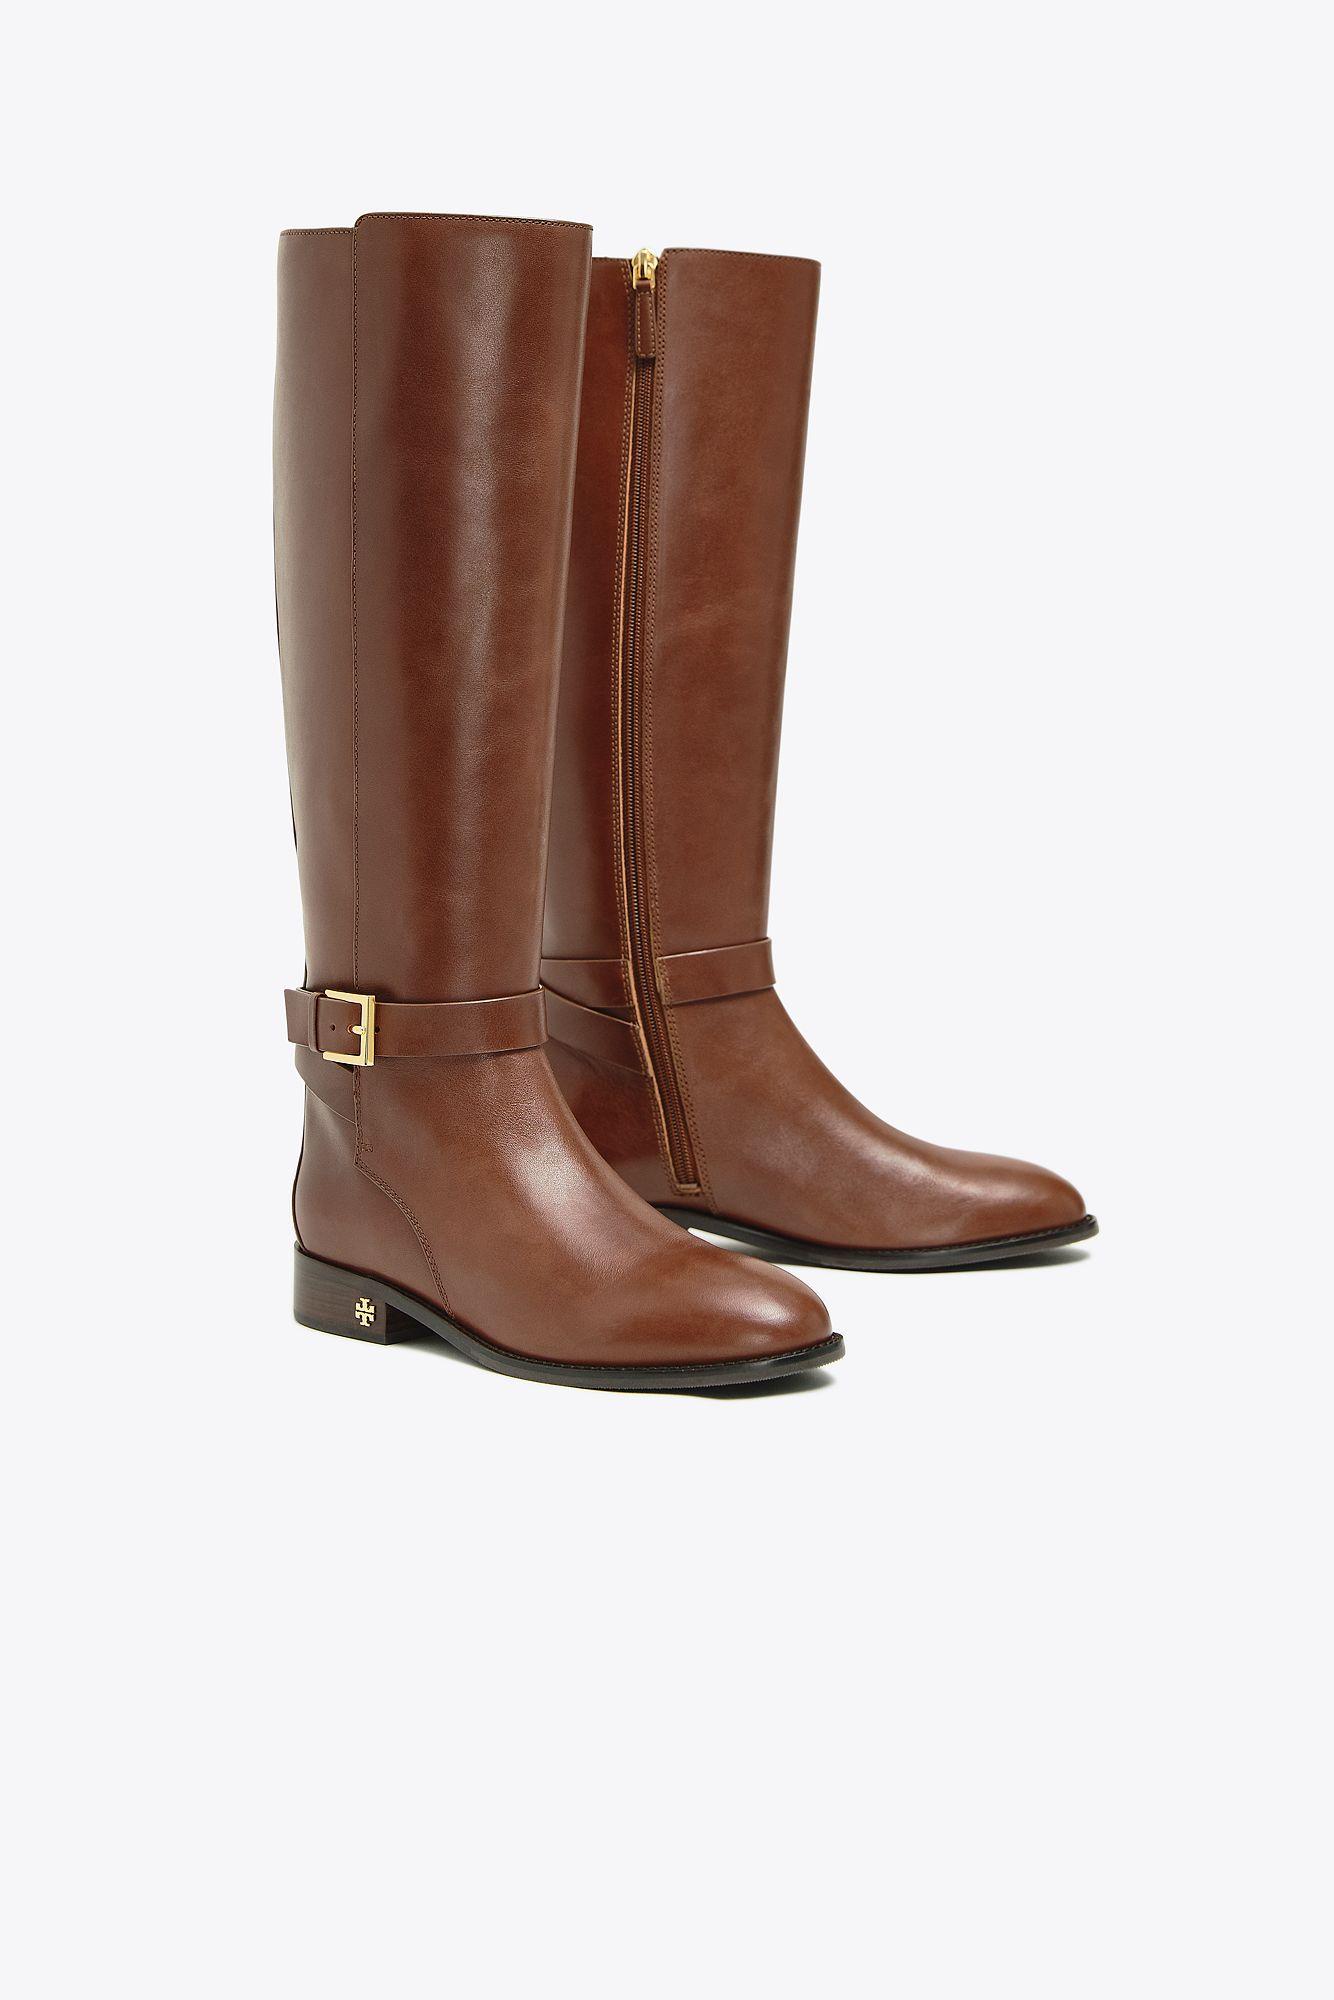 Tory Burch Brooke Riding Boots in Brown | Lyst